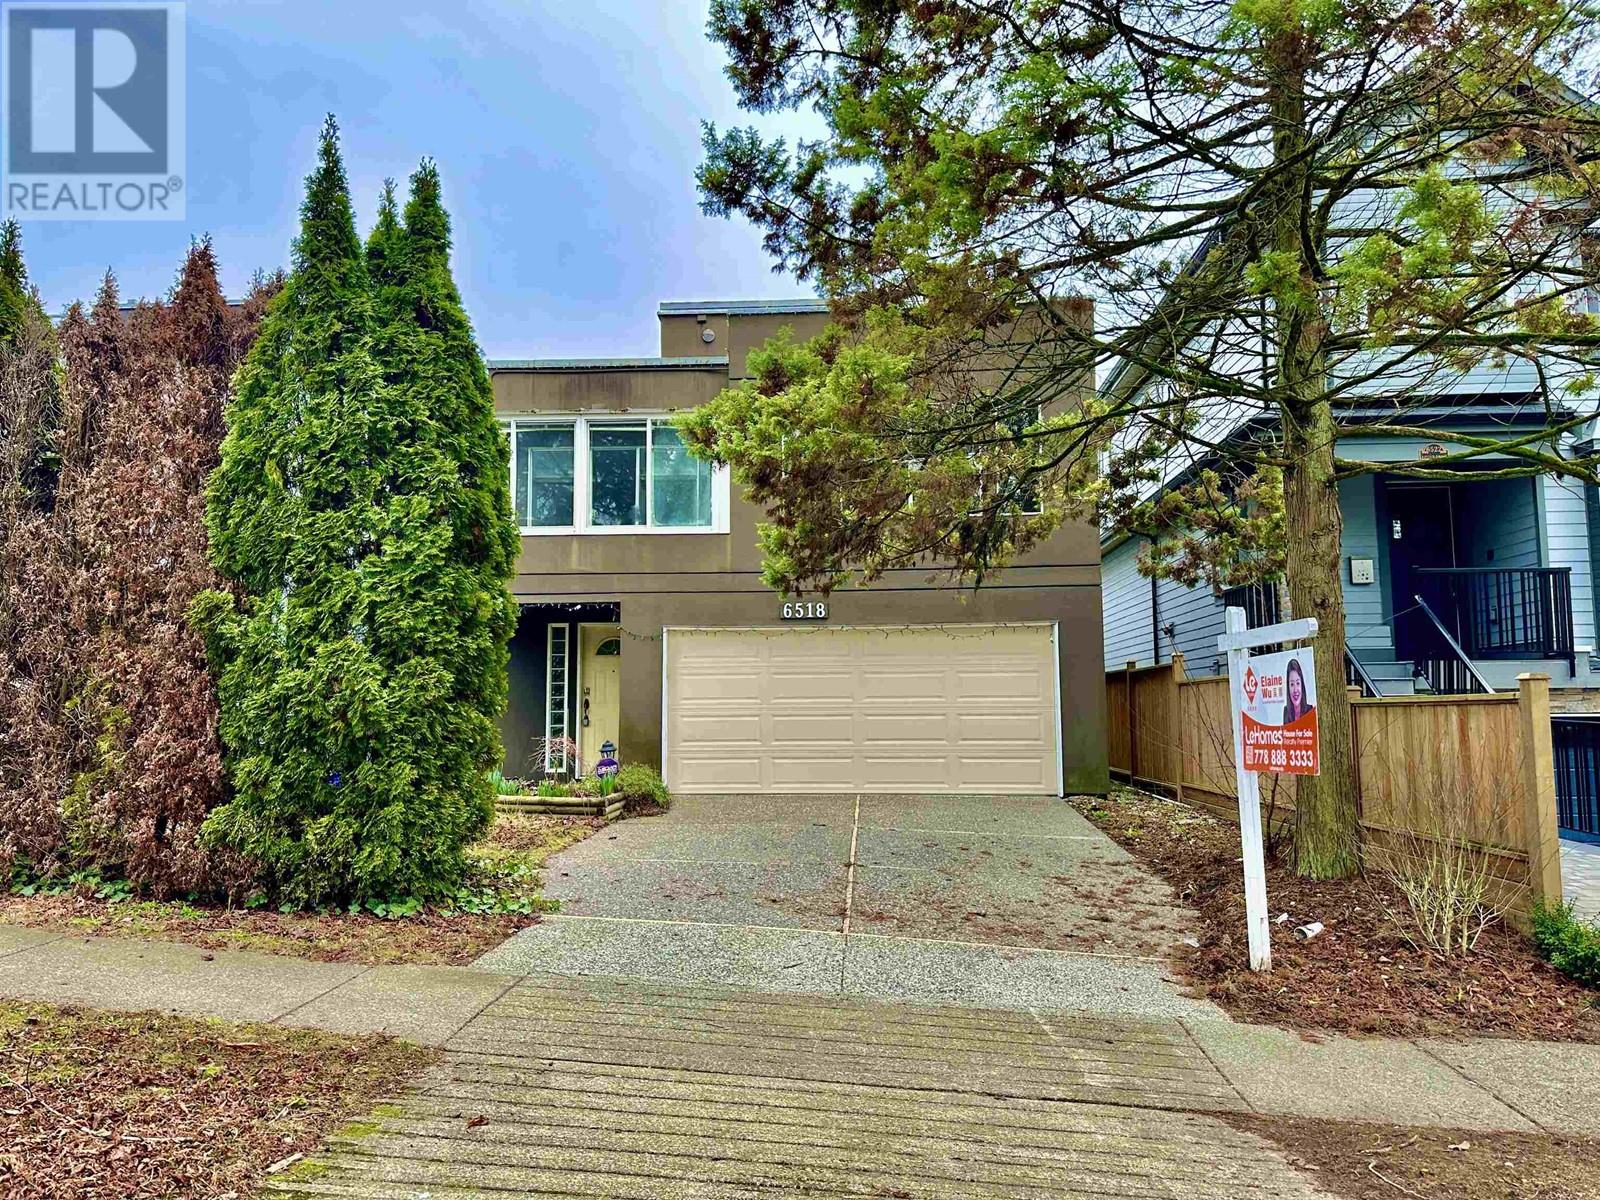 Listing Picture 2 of 32 : 6518 ANGUS DRIVE, Vancouver / 溫哥華 - 魯藝地產 Yvonne Lu Group - MLS Medallion Club Member